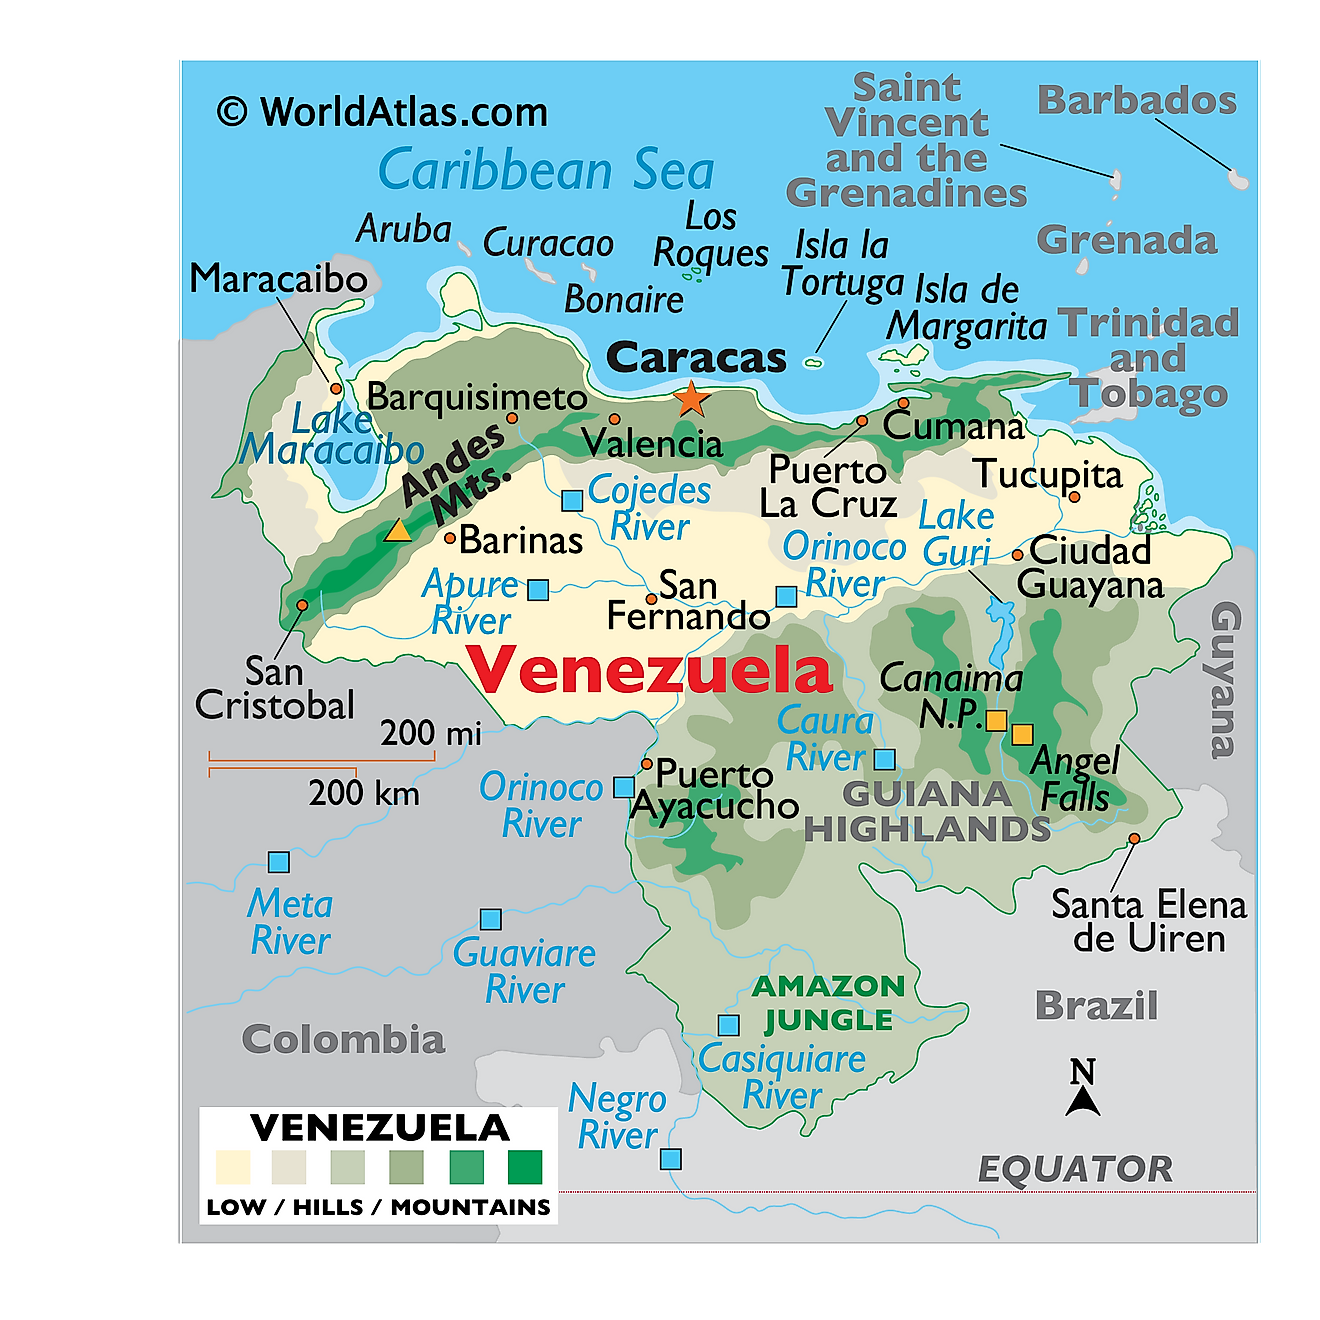 Physical Map of Venezuela showing relief, mountains, major lakes and rivers, the Angel Falls, Amazon Jungle, important cities, bordering countries, and more.